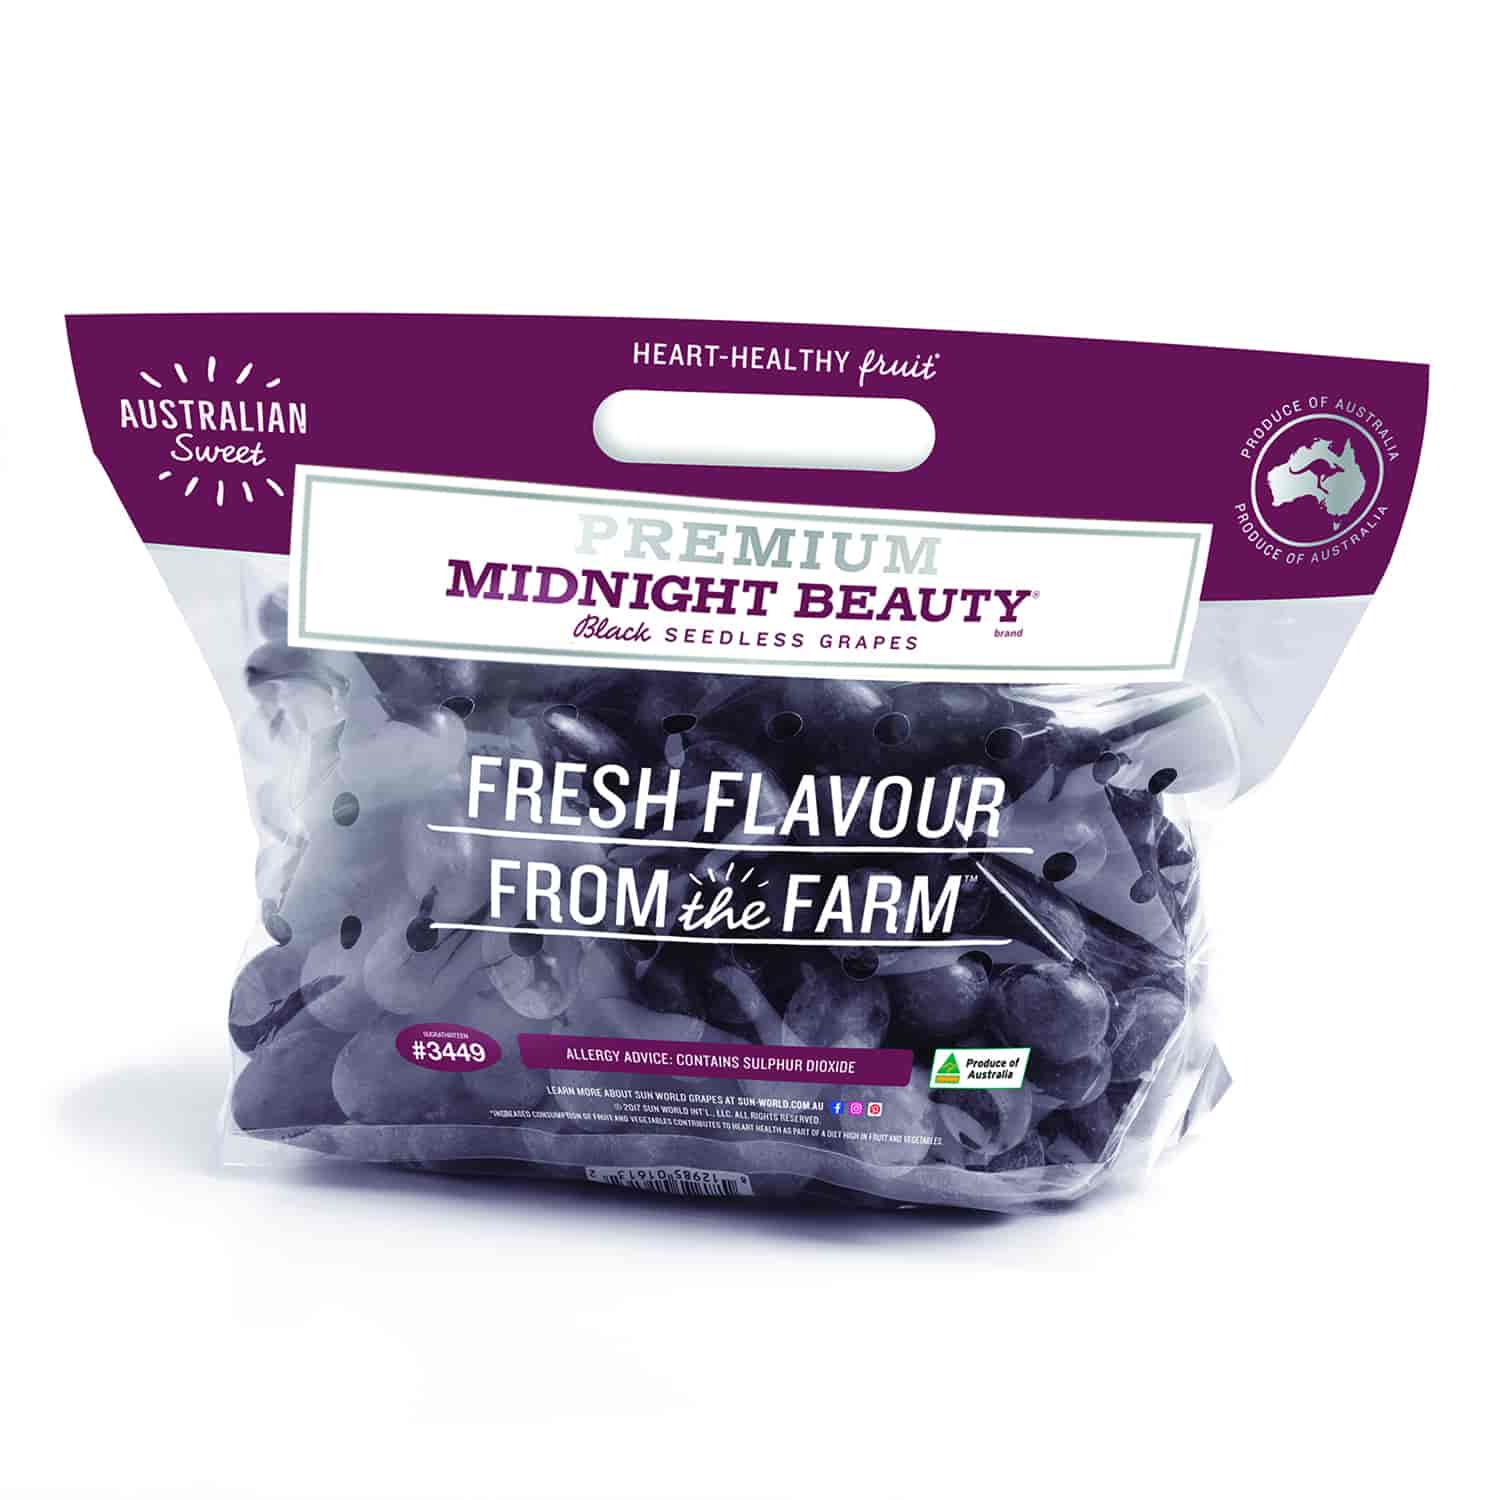 A bag of Midnight Beauty black seedless grapes.